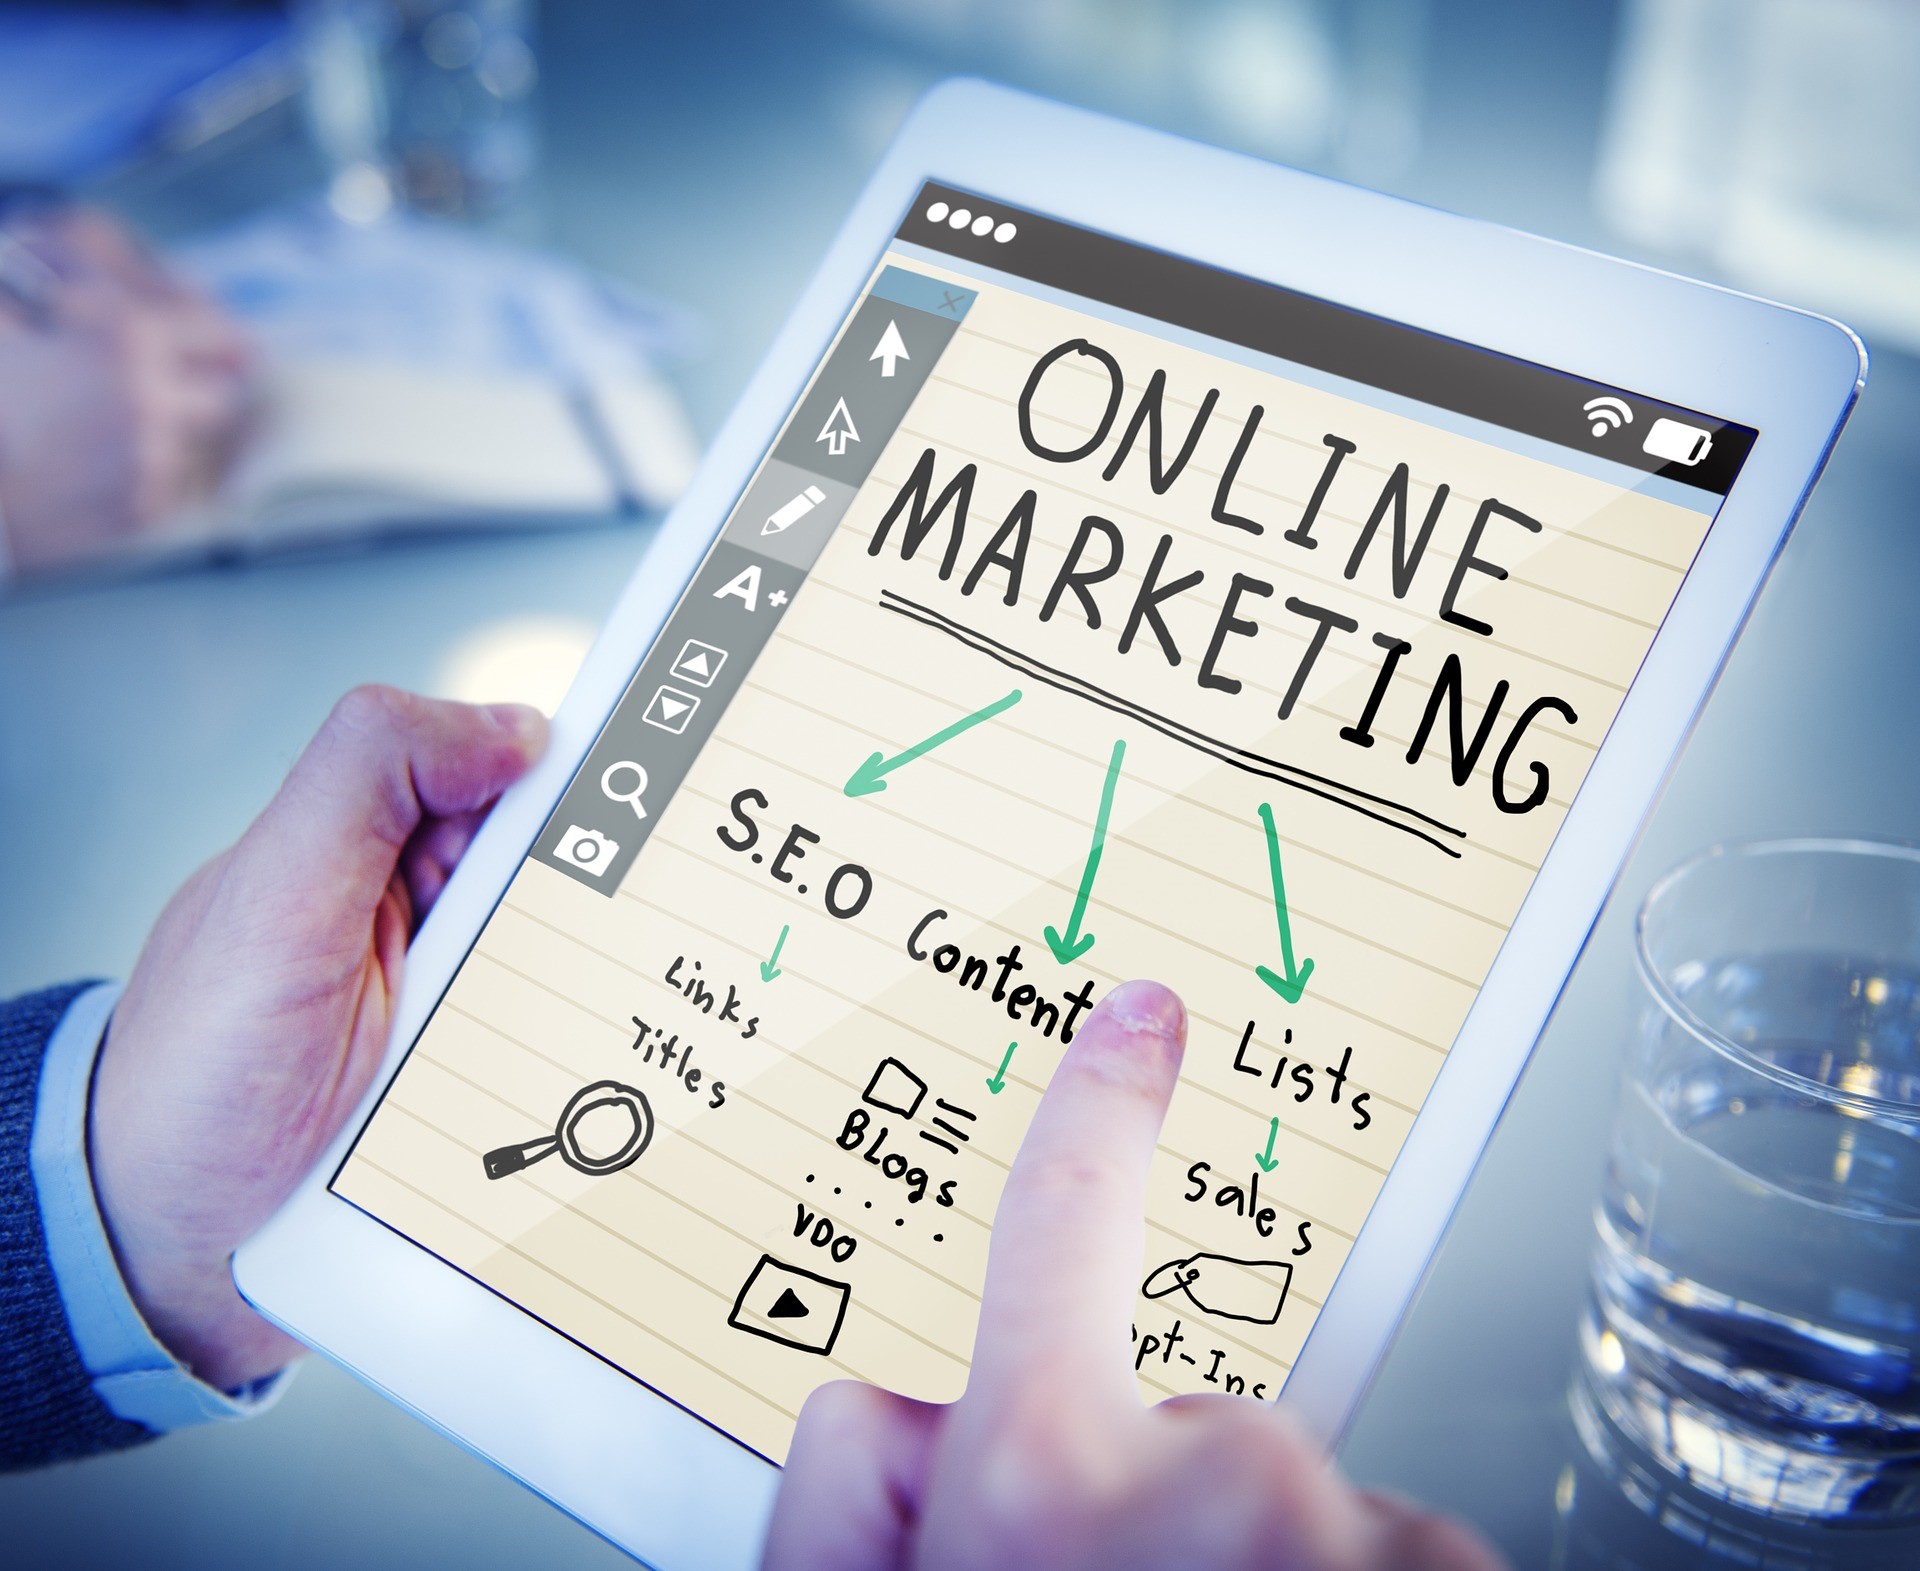 9 Simple Digital Marketing Rules Every Nonprofit Should Know